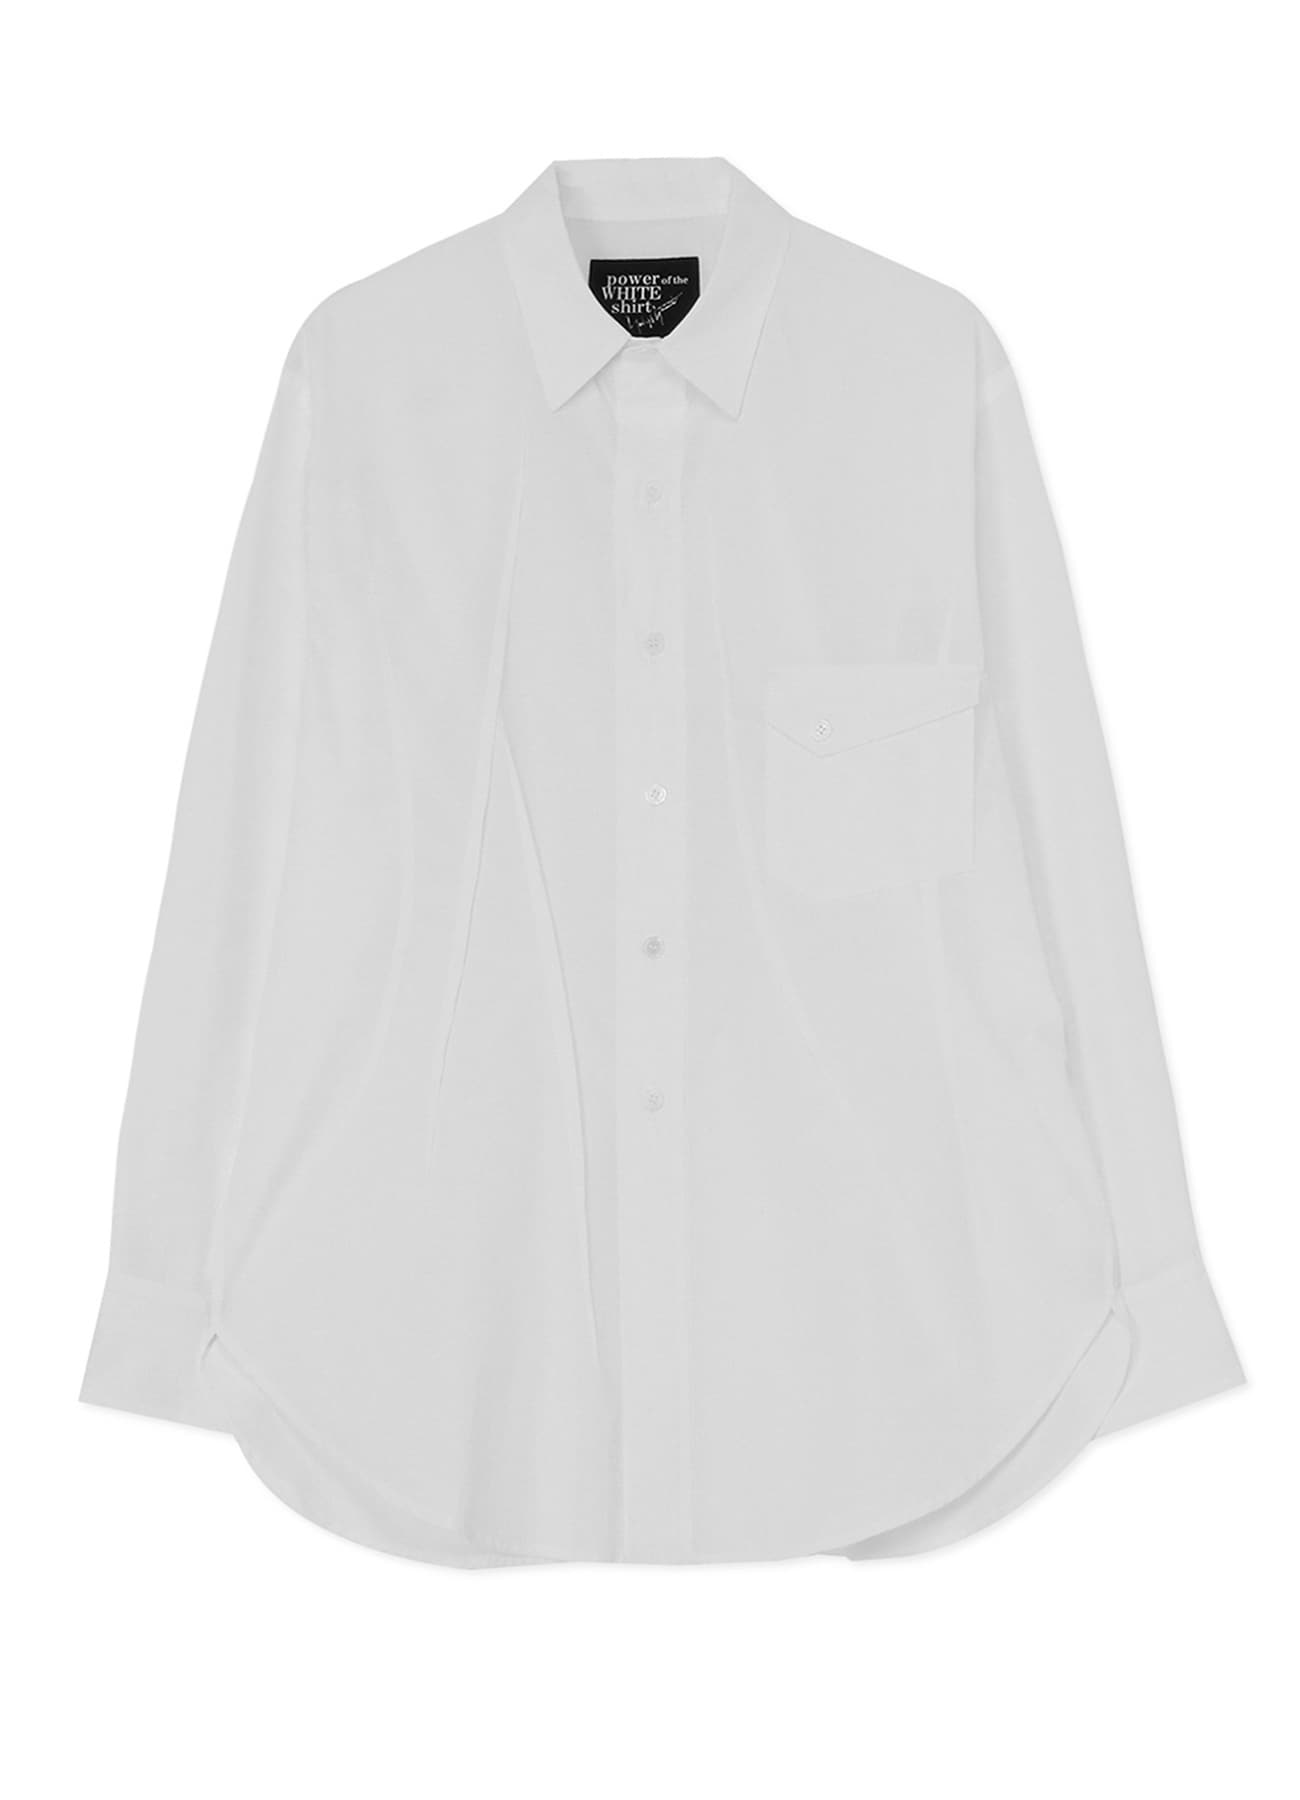 P・100/2 BROAD J-FRONT DARTS SHIRT(S White): power of the WHITE 